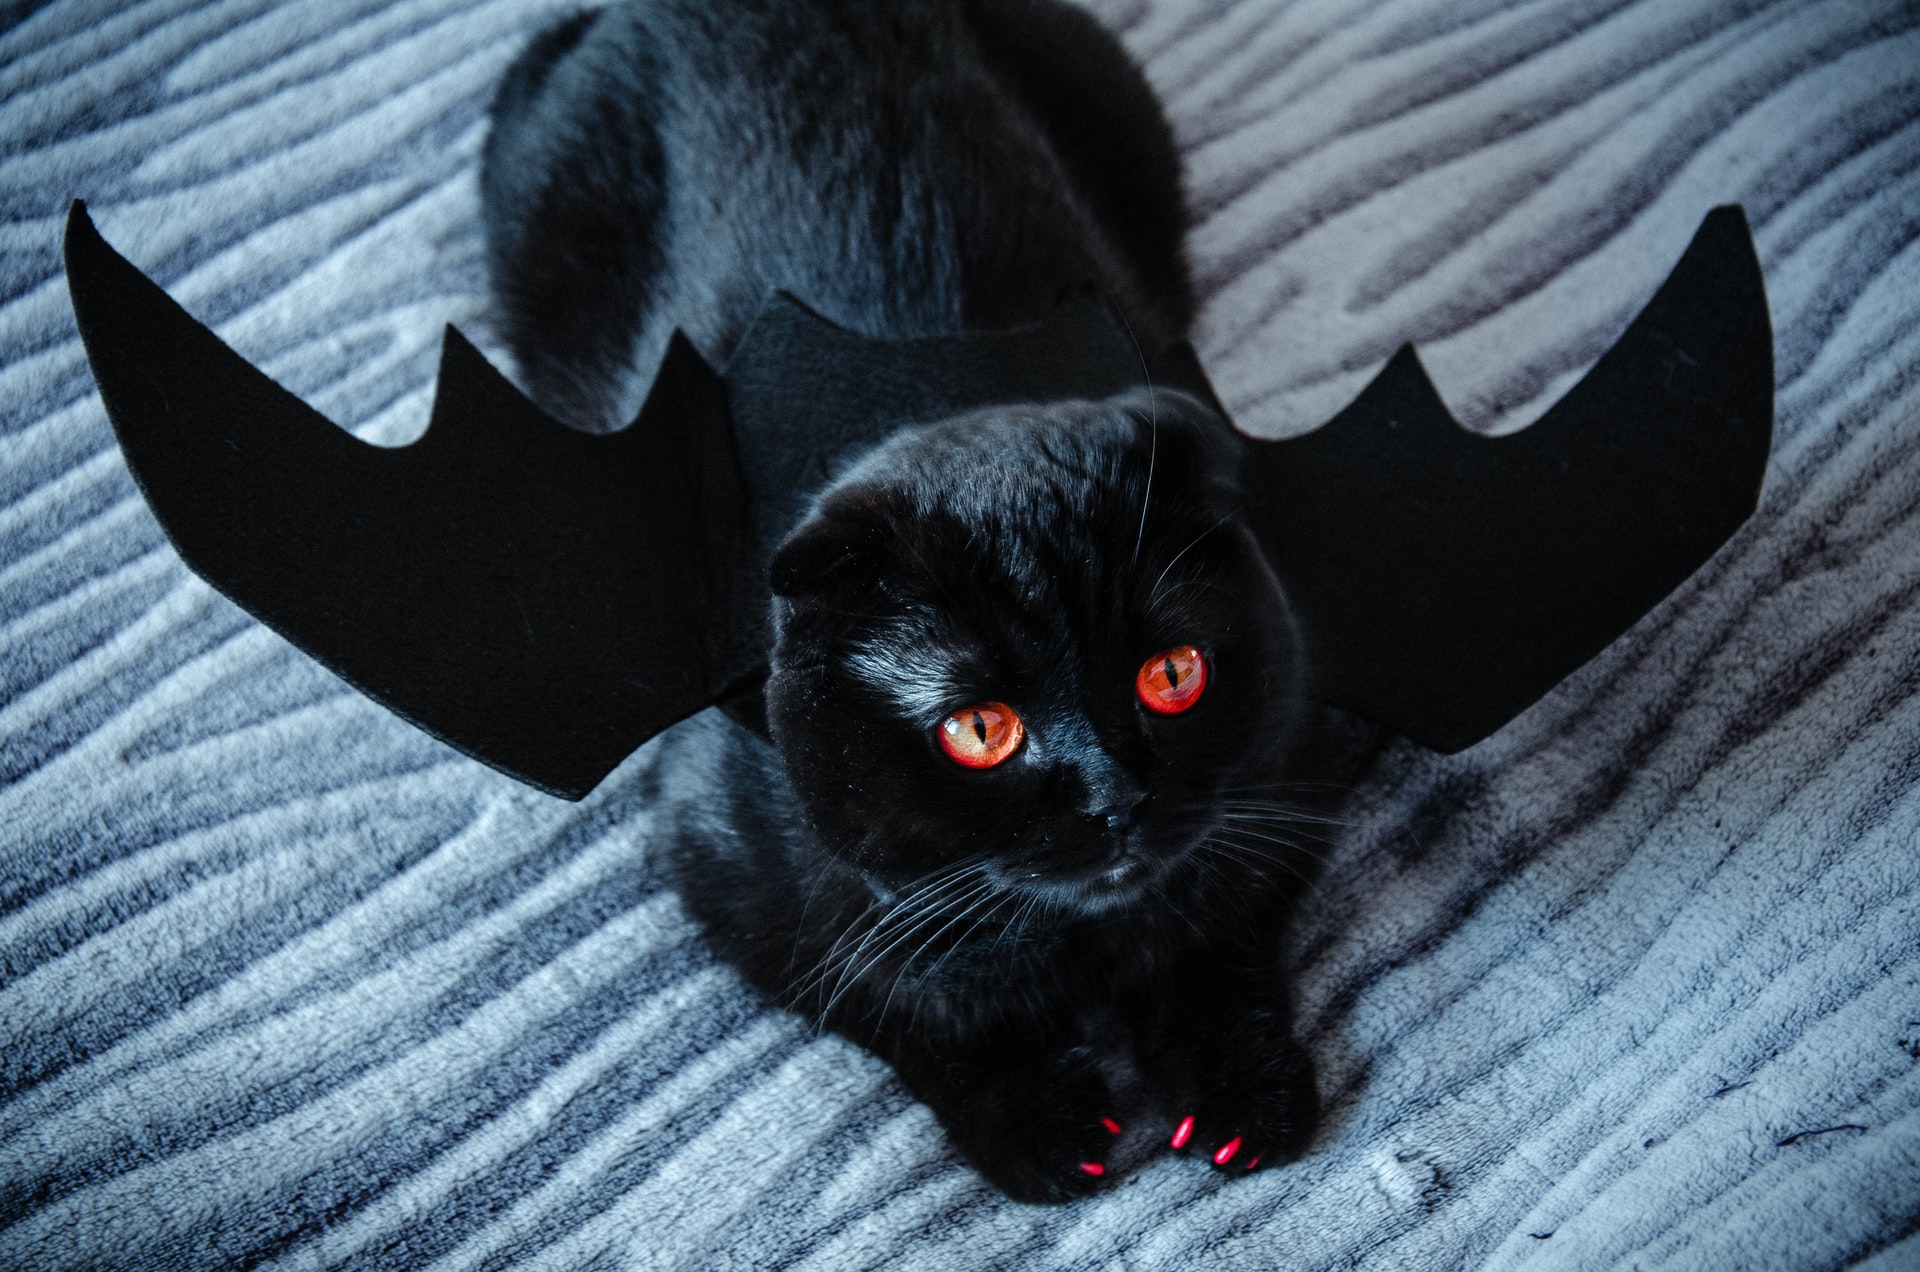 A black cat with amber eyes wearing a bat costume.